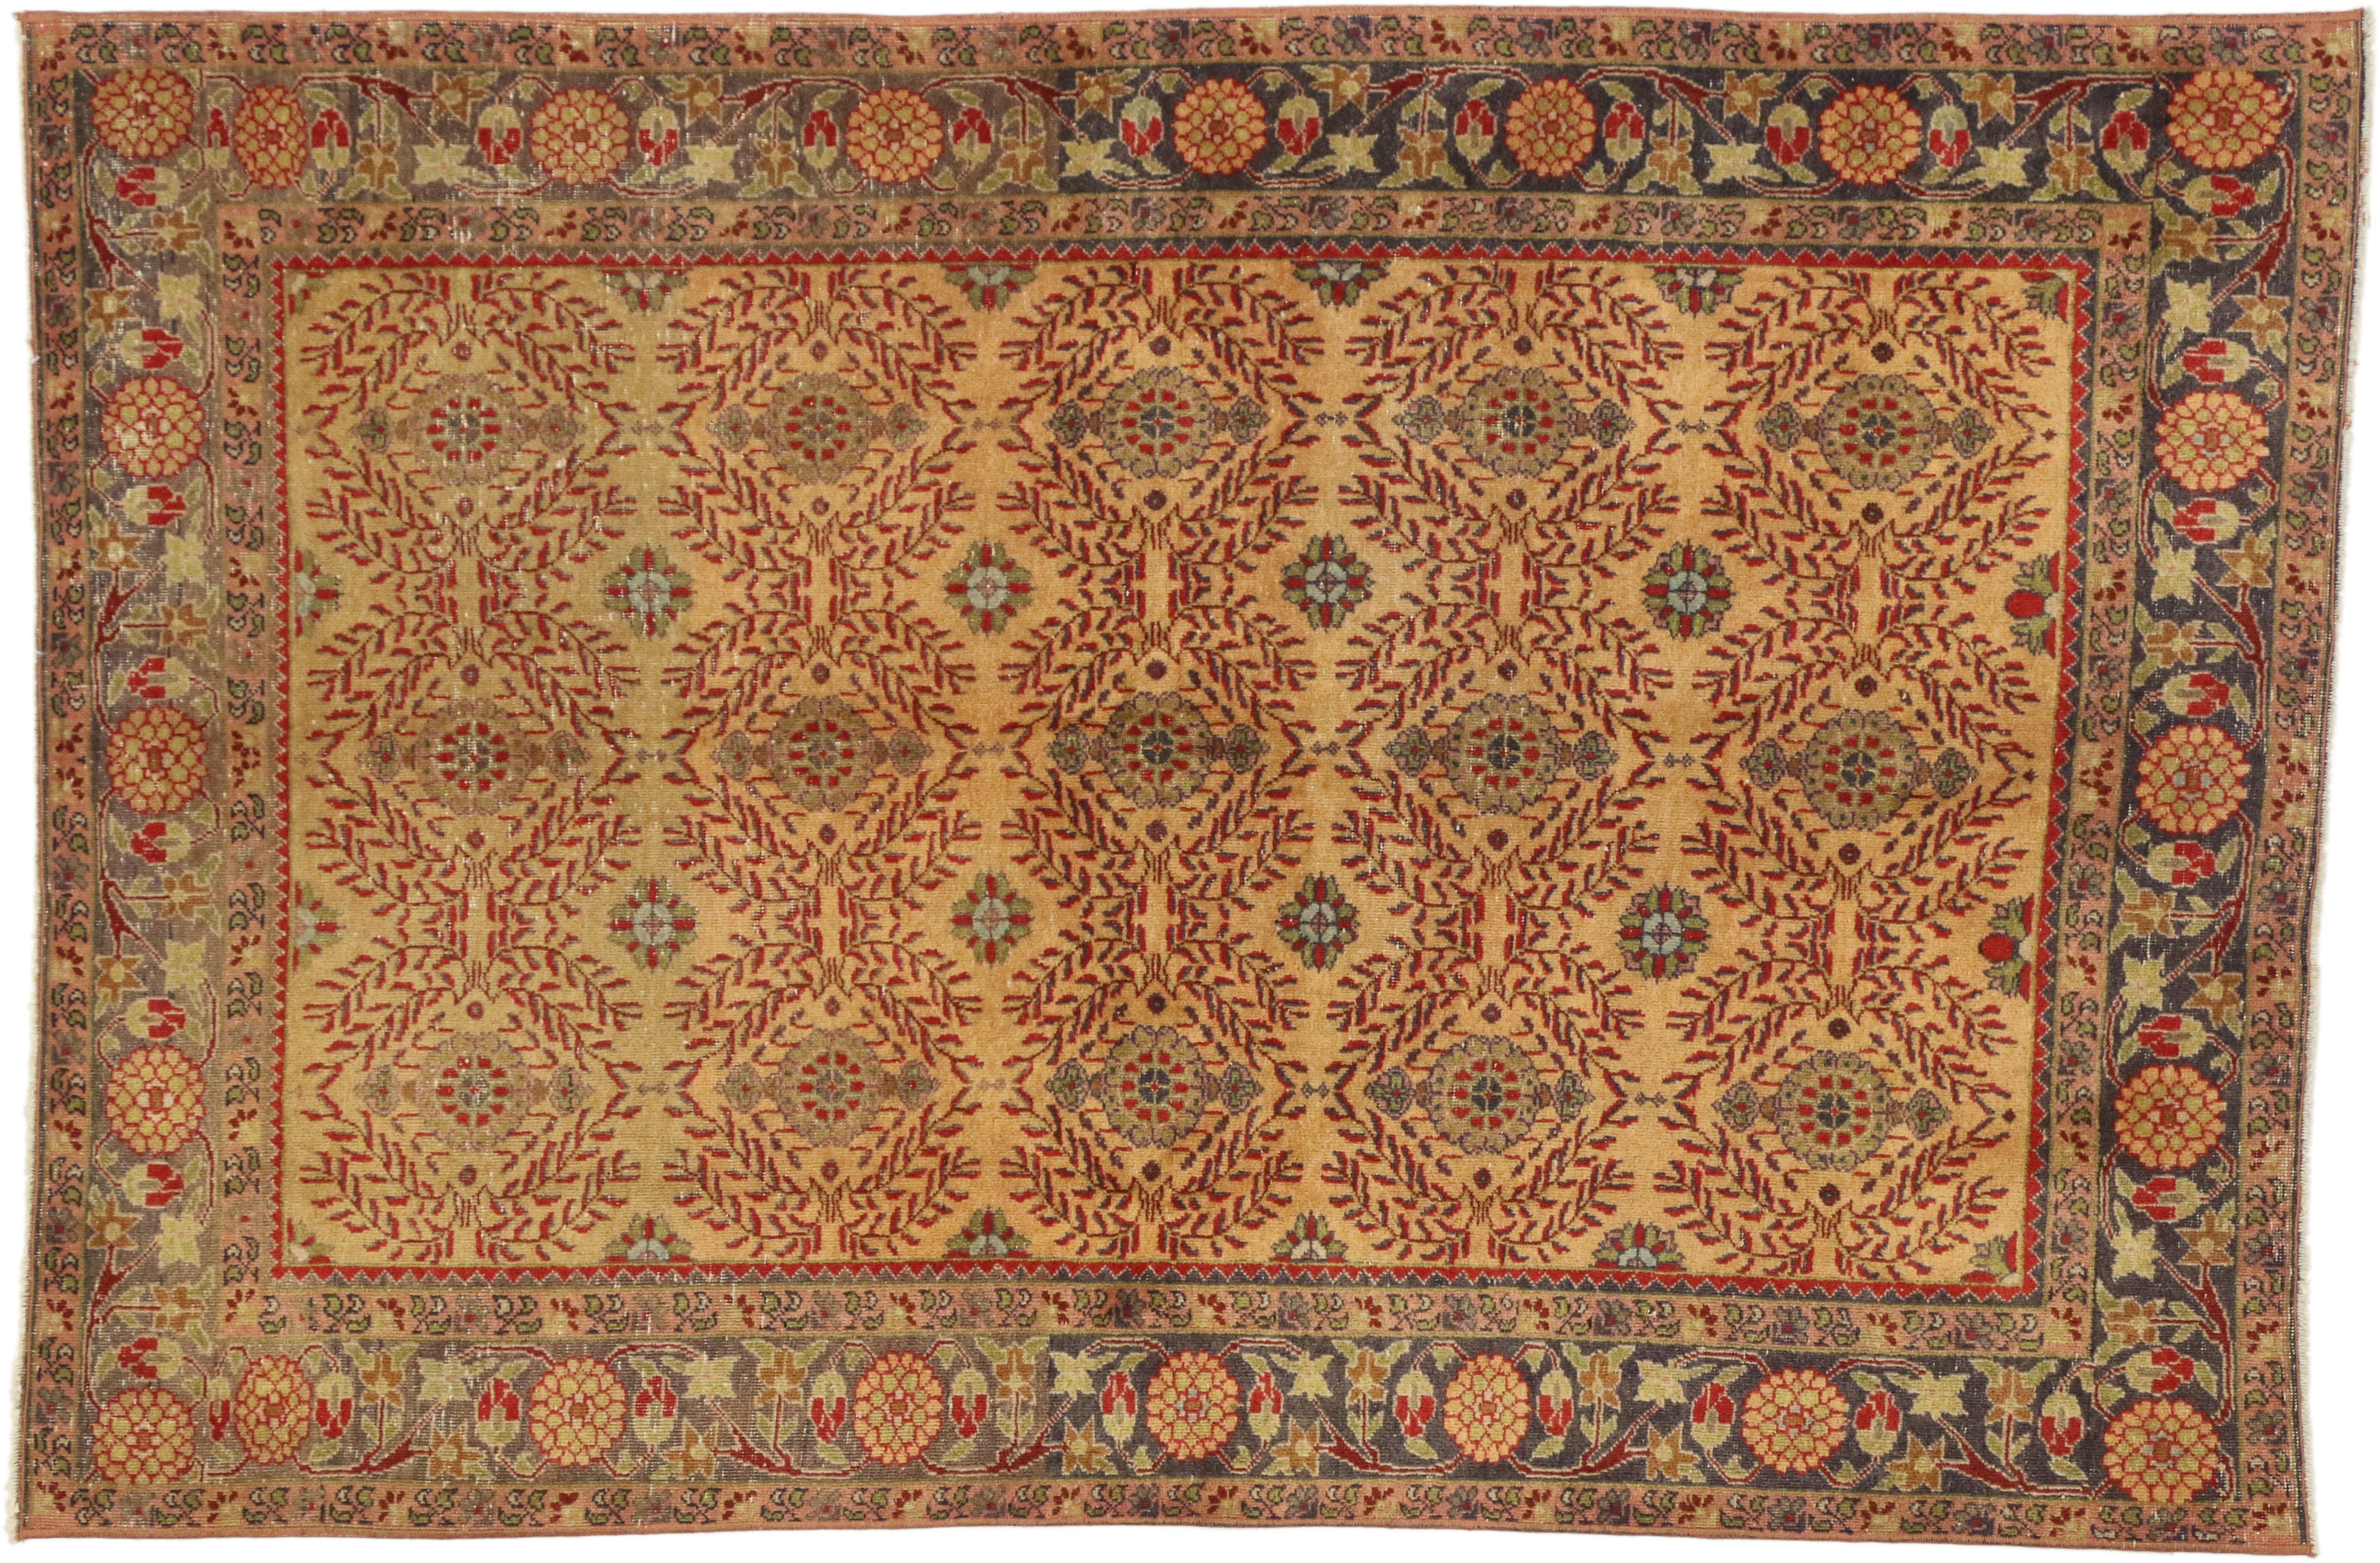 Vintage Turkish Oushak Rug with Rustic Spanish Style In Good Condition For Sale In Dallas, TX